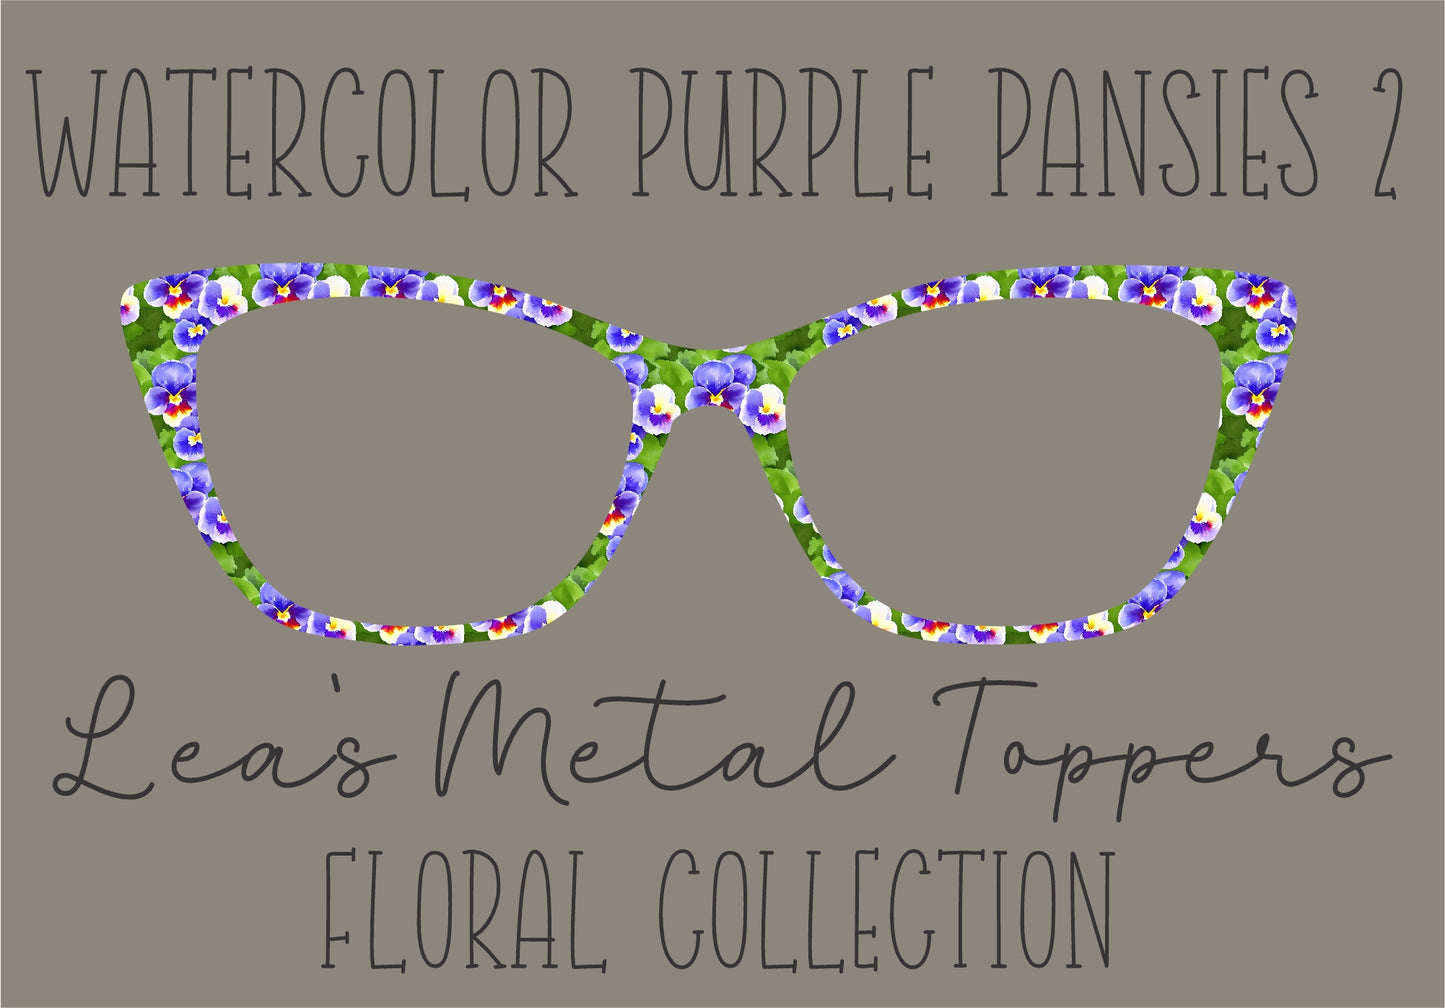 WATERCOLOR PURPLE PANSIES 2 Eyewear Frame Toppers COMES WITH MAGNETS